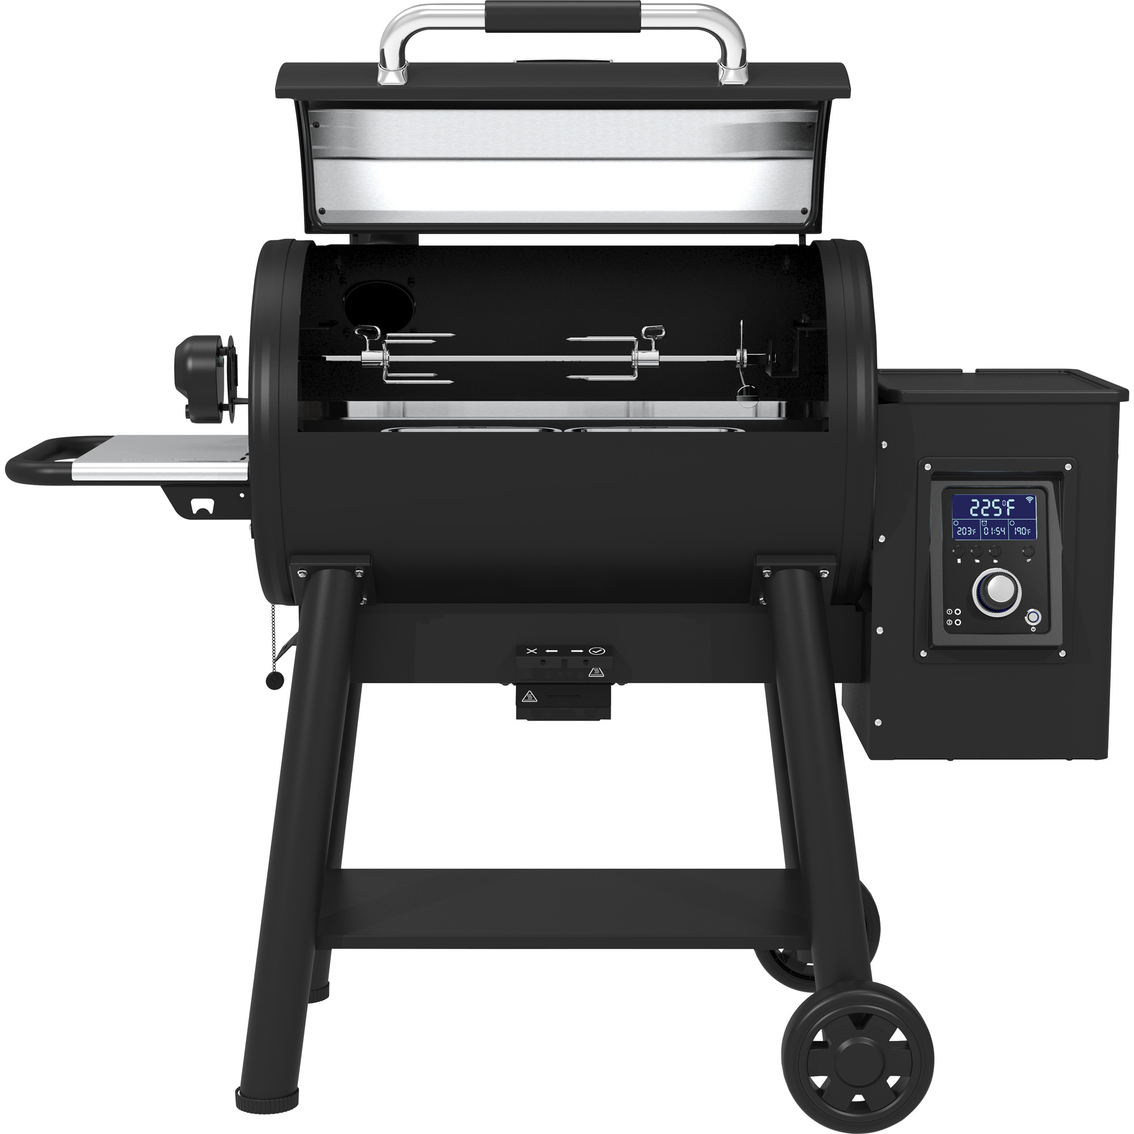 Broil King Regal WiFi Controlled Pellet 500 Grill - Image 2 of 10